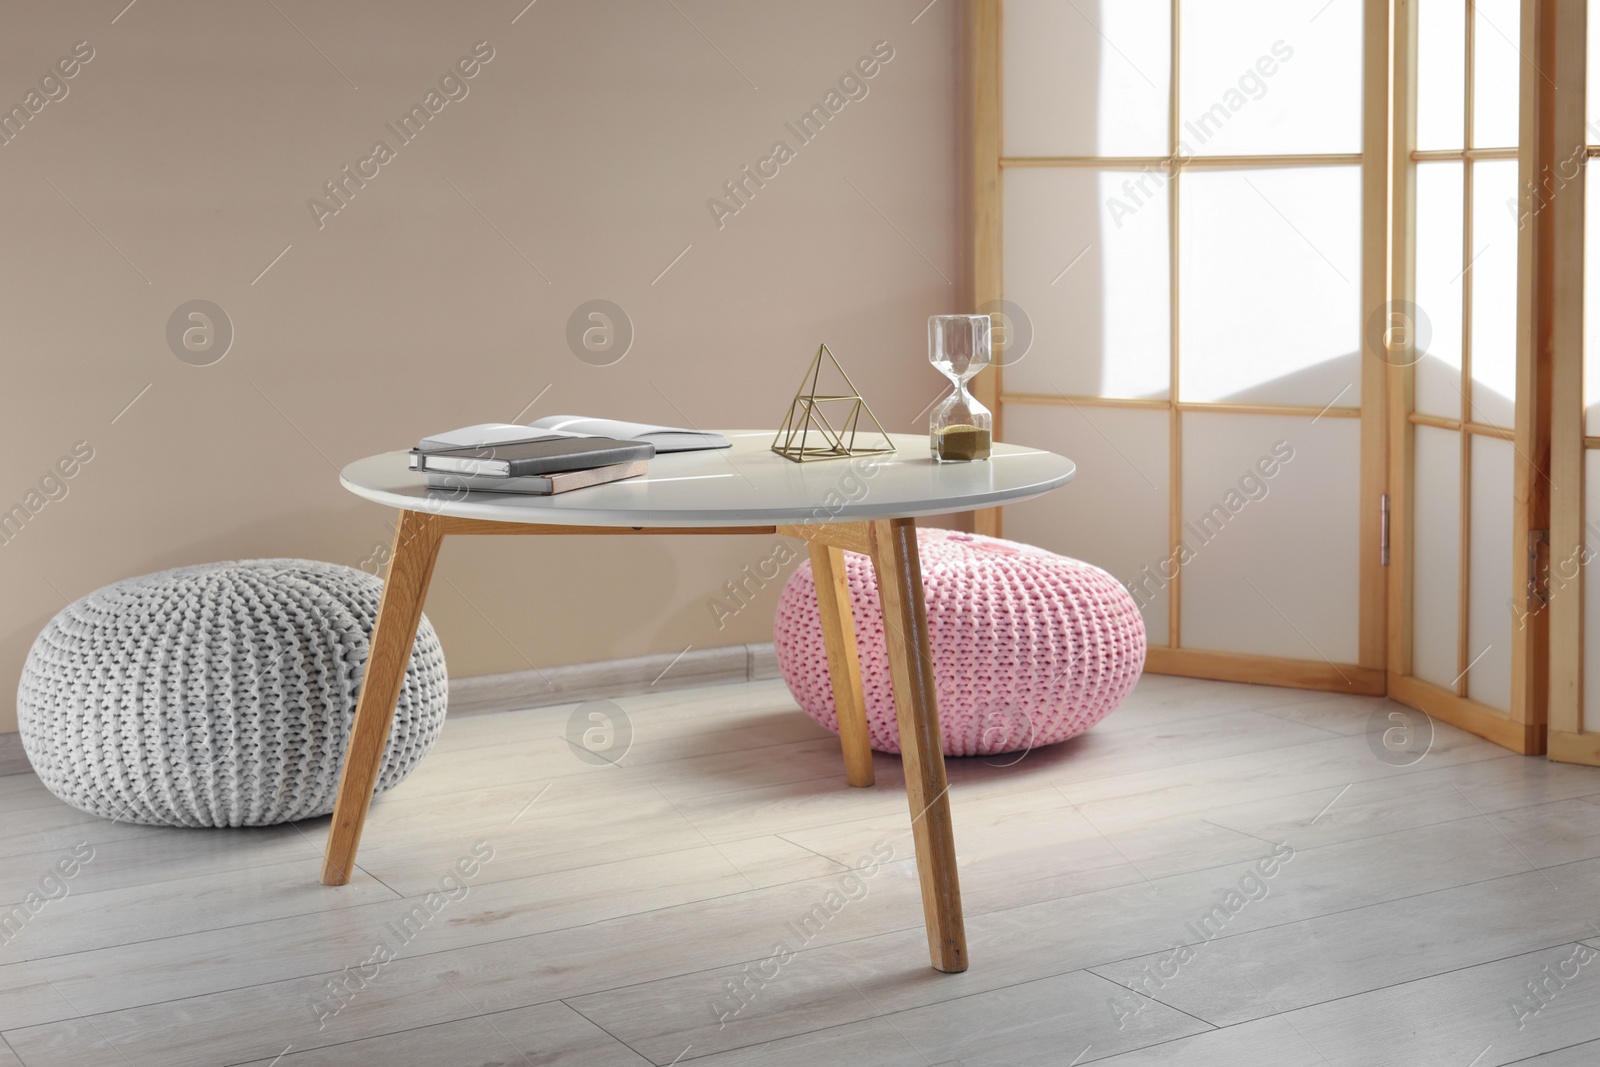 Photo of White table with books, golden pyramid and hourglass in room. Interior design